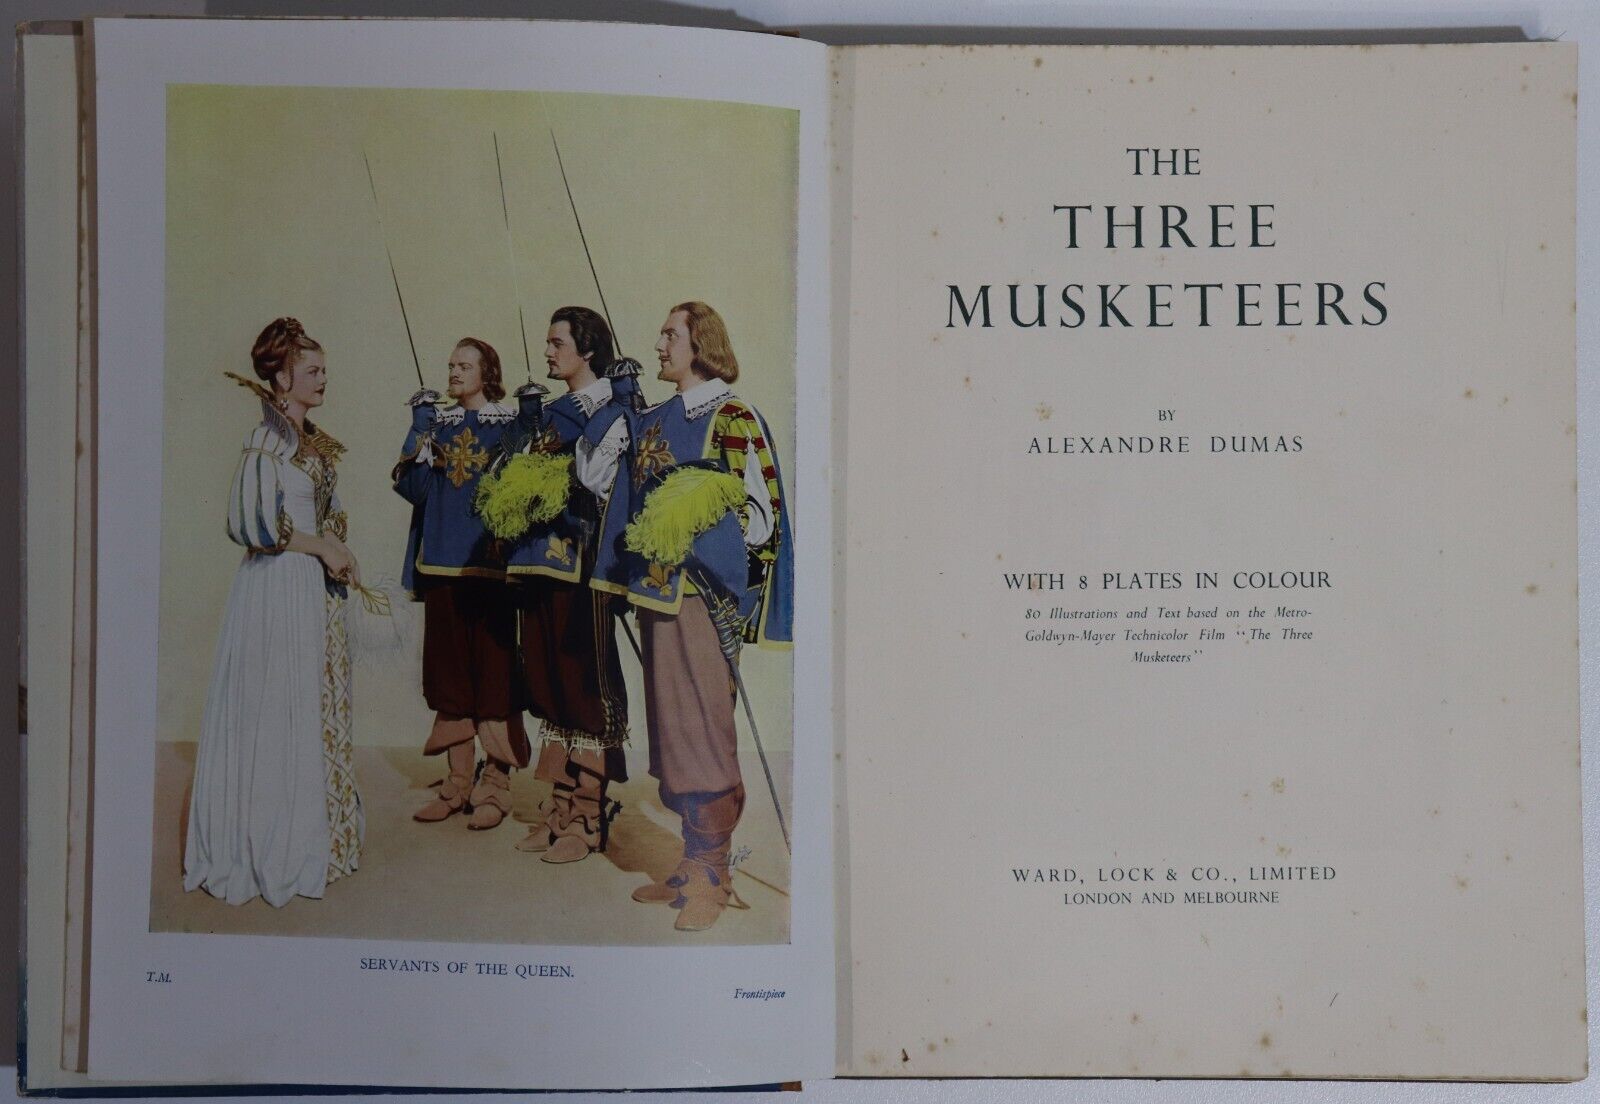 The Three Musketeers by Alexandre Dumas - c1955 - Vintage Children's Book - 0